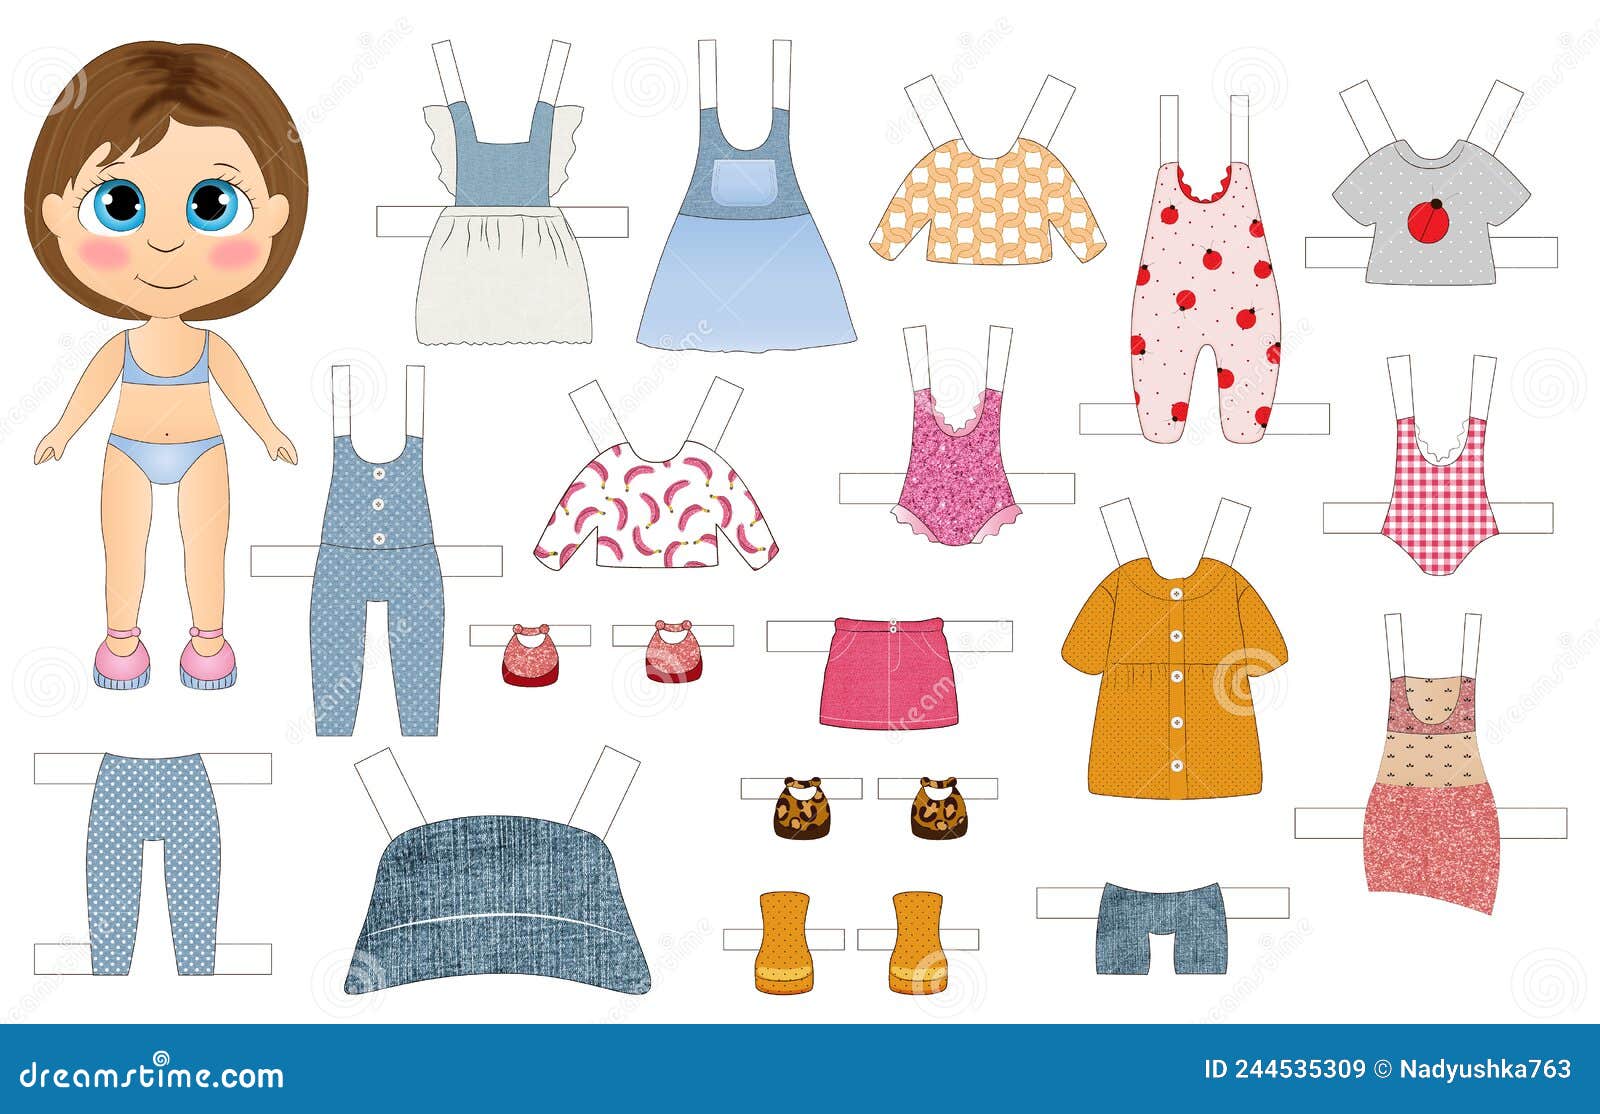 Paper Doll Cutout. Dress Me Up Toy Illustration. Stock Illustration ...